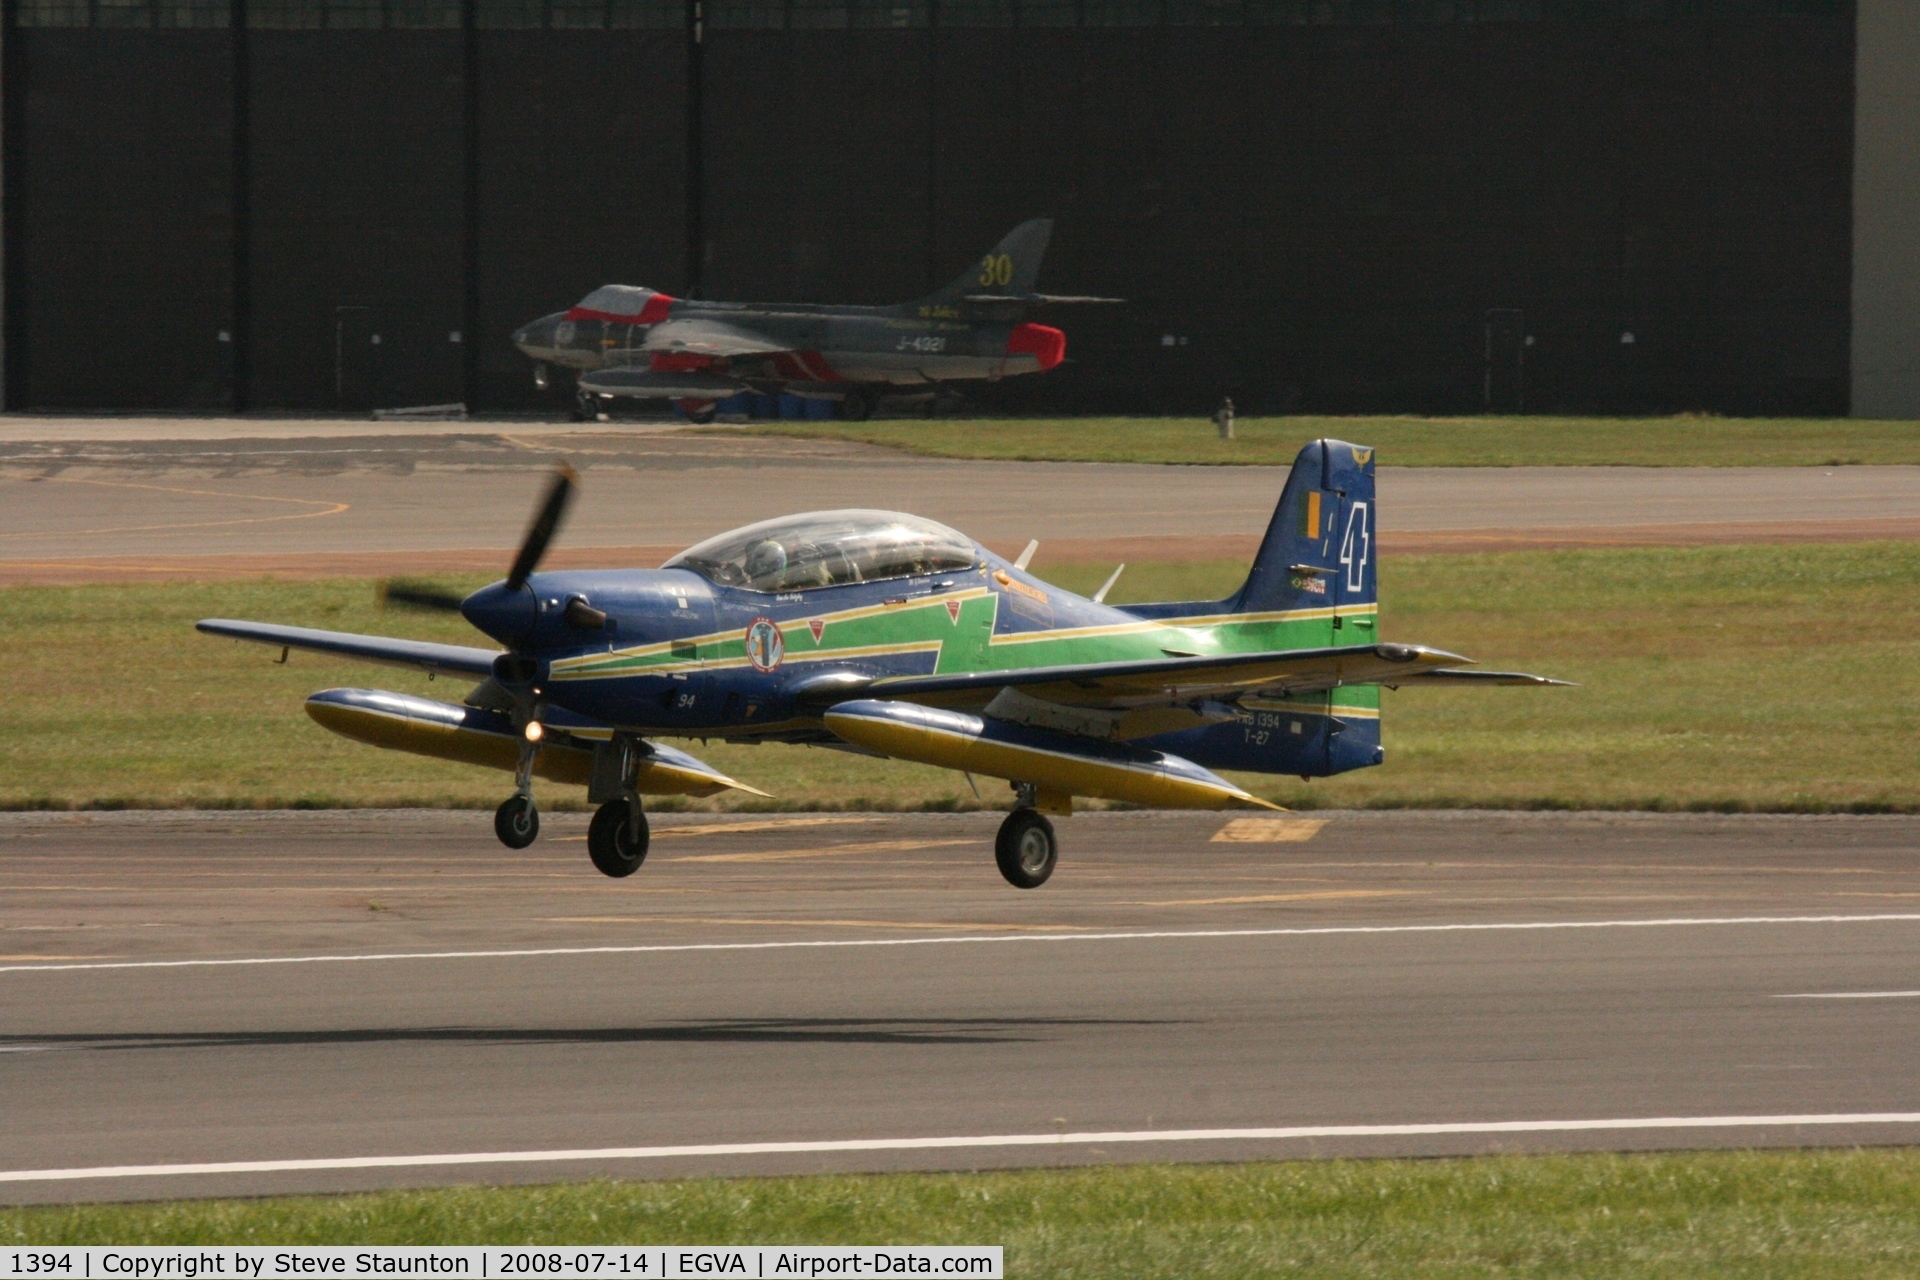 1394, Embraer T-27 Tucano (EMB-312) C/N 312145, Taken at the Royal International Air Tattoo 2008 during arrivals and departures (show days cancelled due to bad weather)